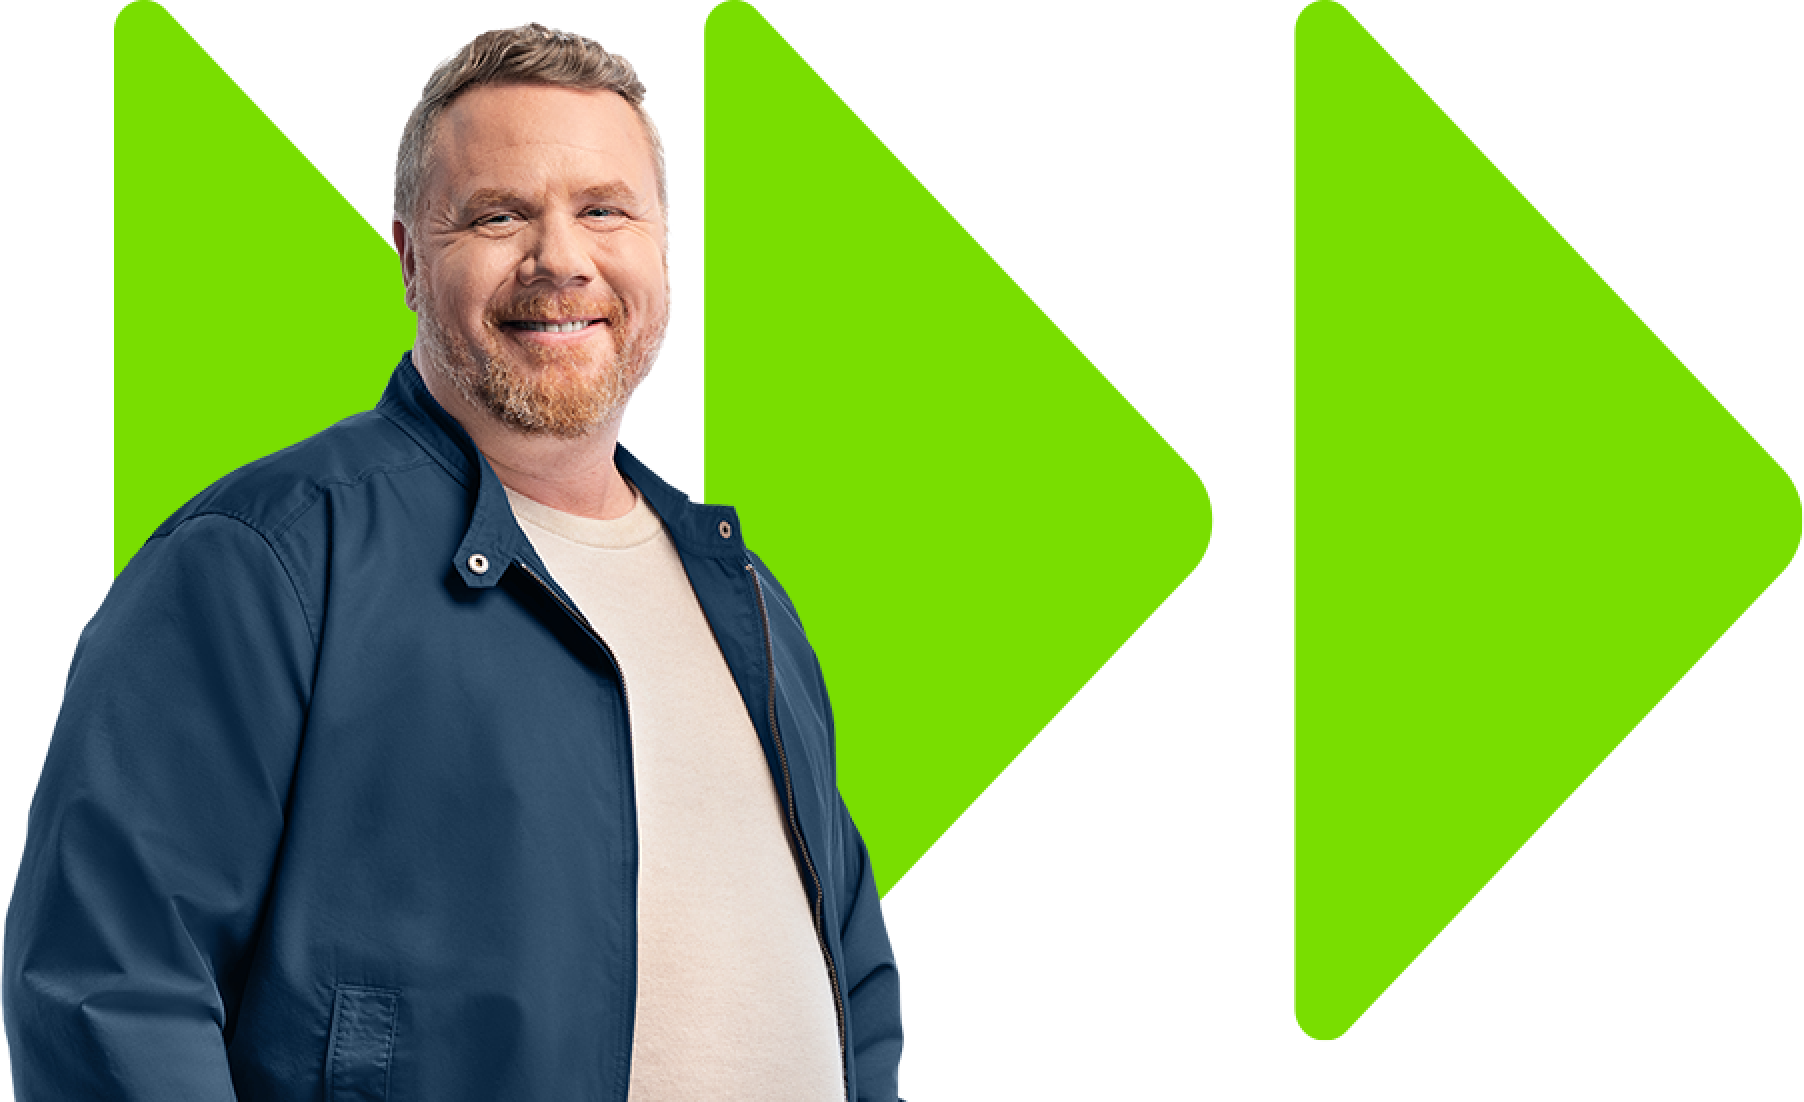 Man smiling in front of a green arrow background